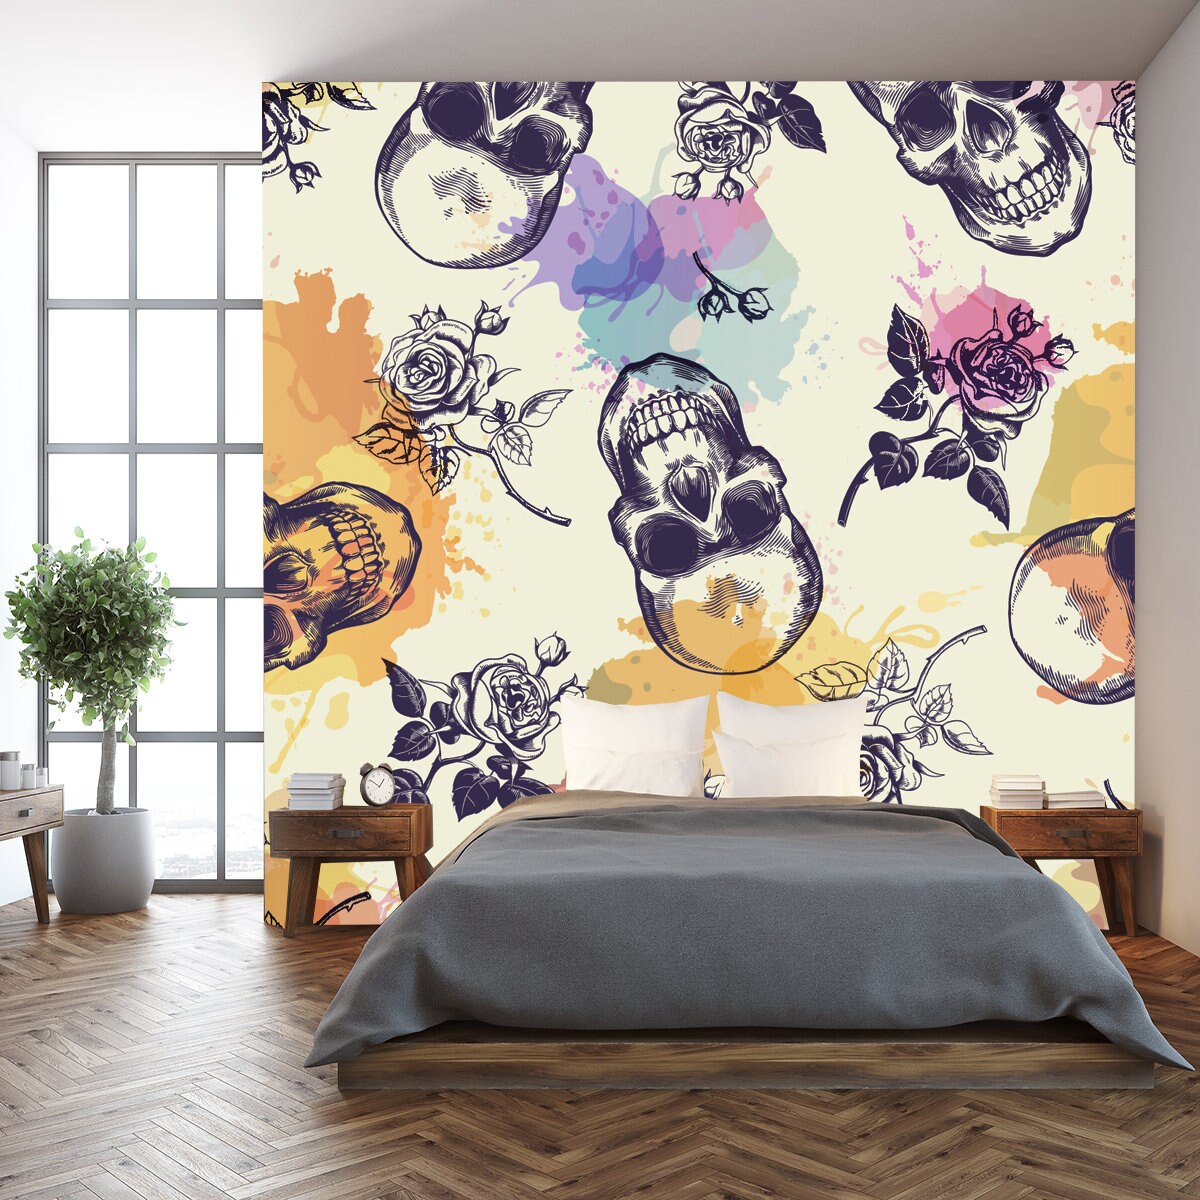 Seamless Pattern with Skulls and Rose Flowers Drawn in Engraving Style and Translucent Colorful Blots Wallpaper Bedroom Mural